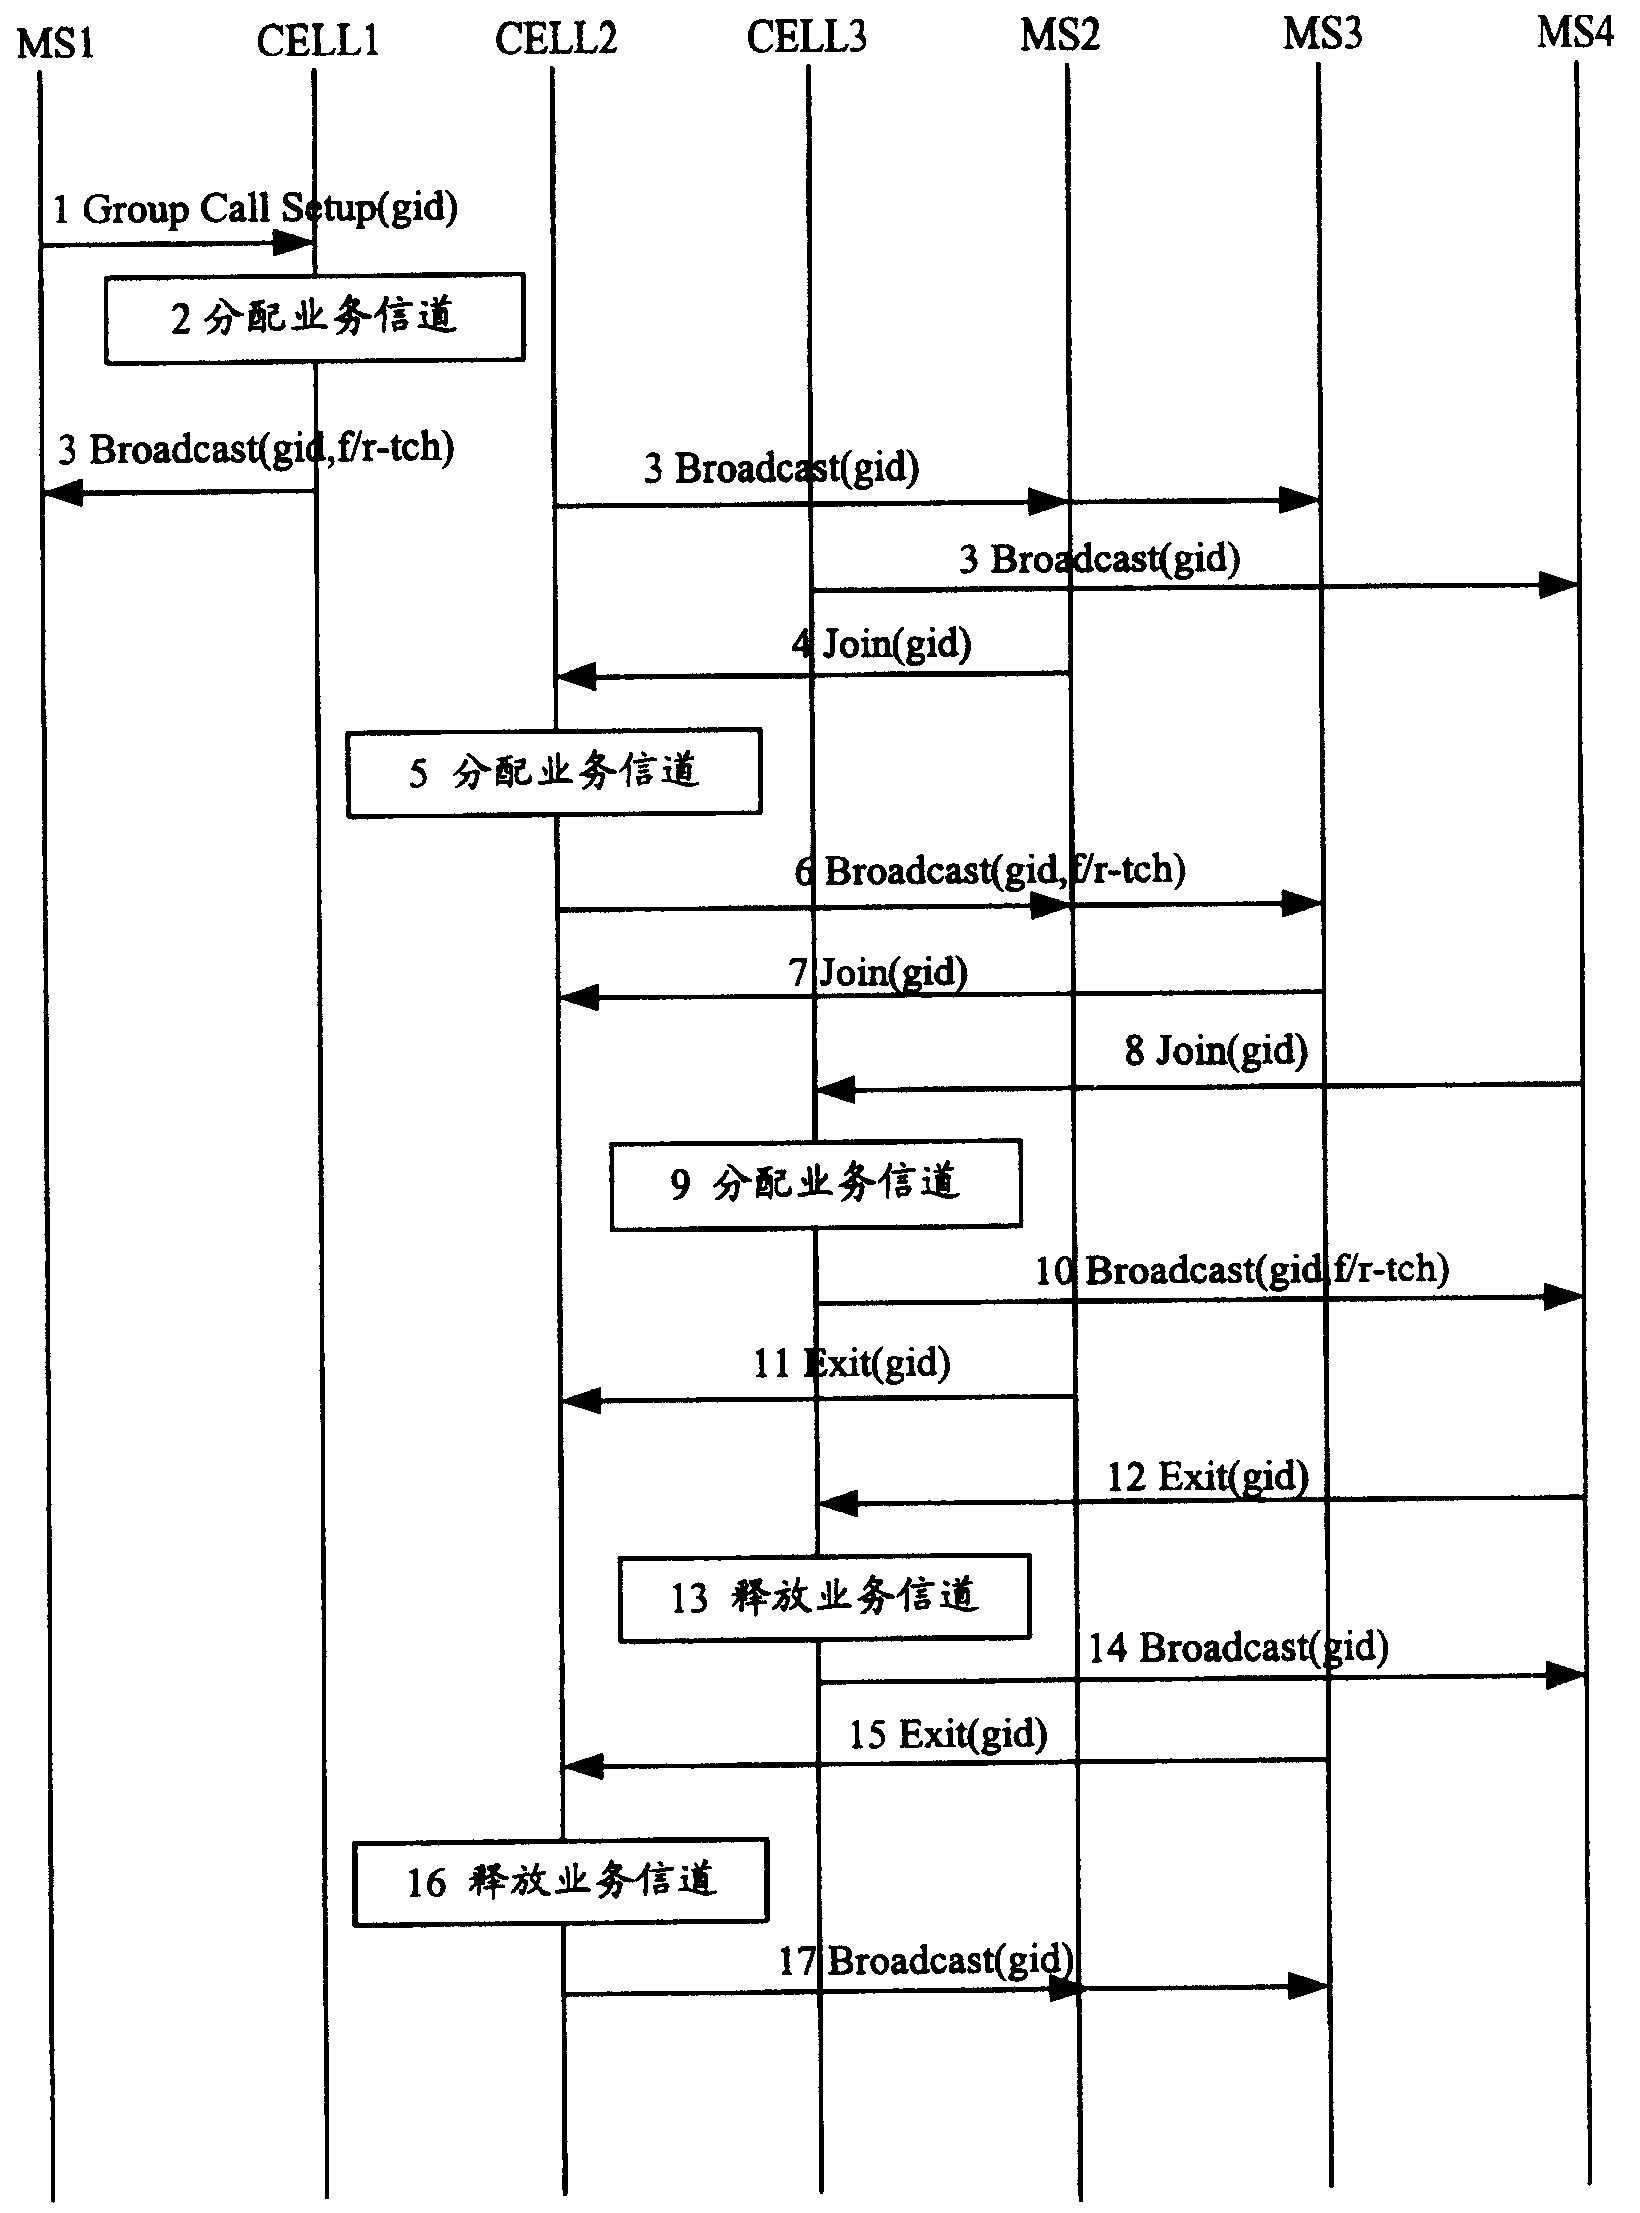 Resource allocating method for cellular cluster communication system